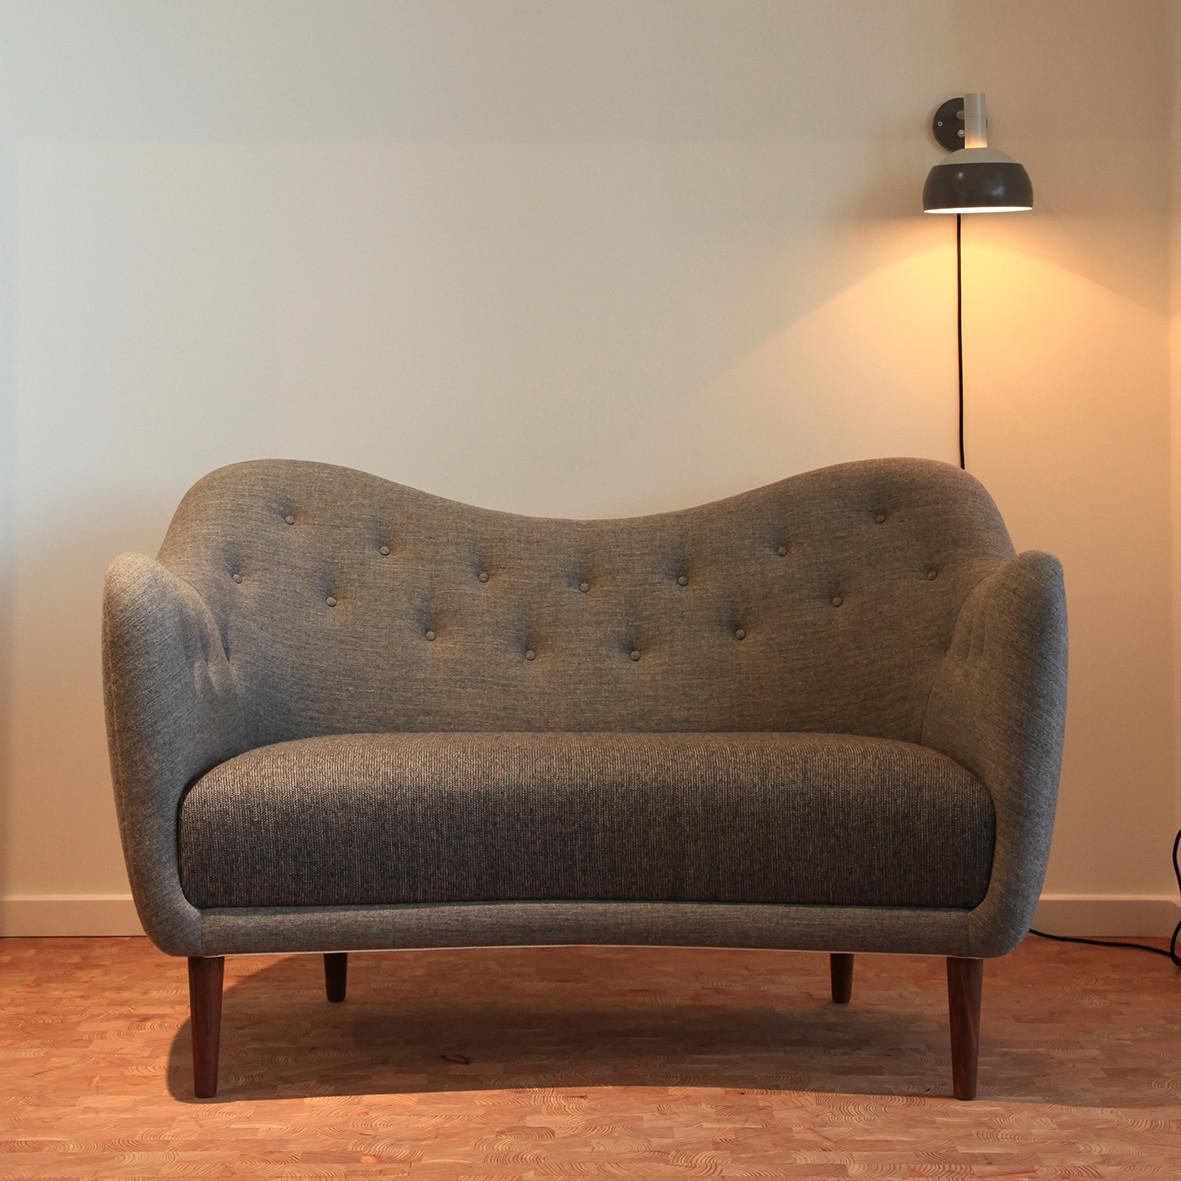 Sofa designed by Finn Juhl in 1946, relaunched in 2008.
Manufactured by House of Finn Juhl in Denmark.

The current fabric of the images is out of stock, it will be upholstered with a similar fabric but it might look a bit different,

As the